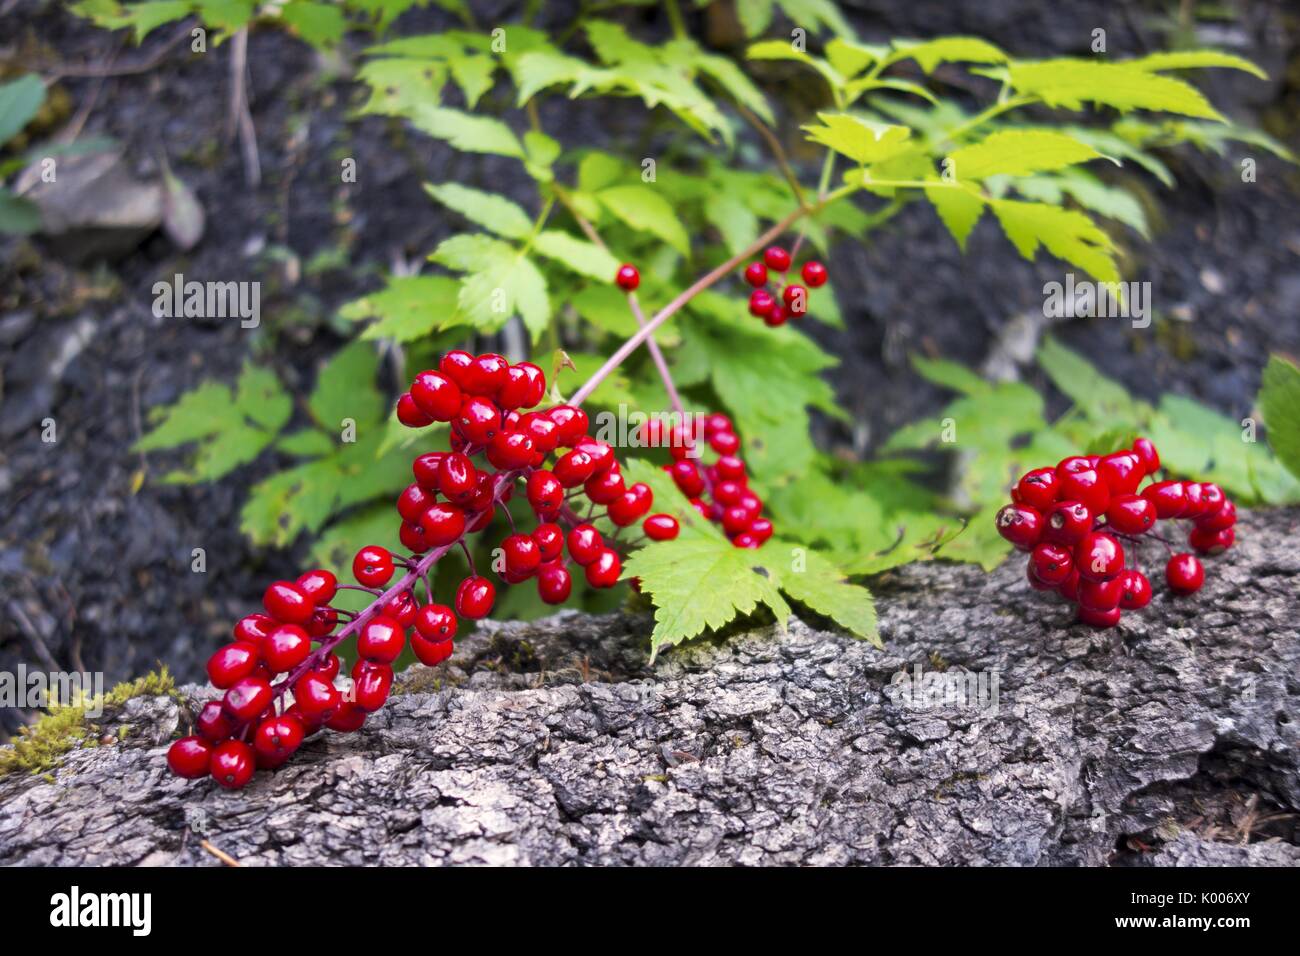 Hawthorn Berry, a large genus of shrubs and trees in the family Rosacea, growing in the foothills of Rocky Mountains in Alberta, Canada Stock Photo